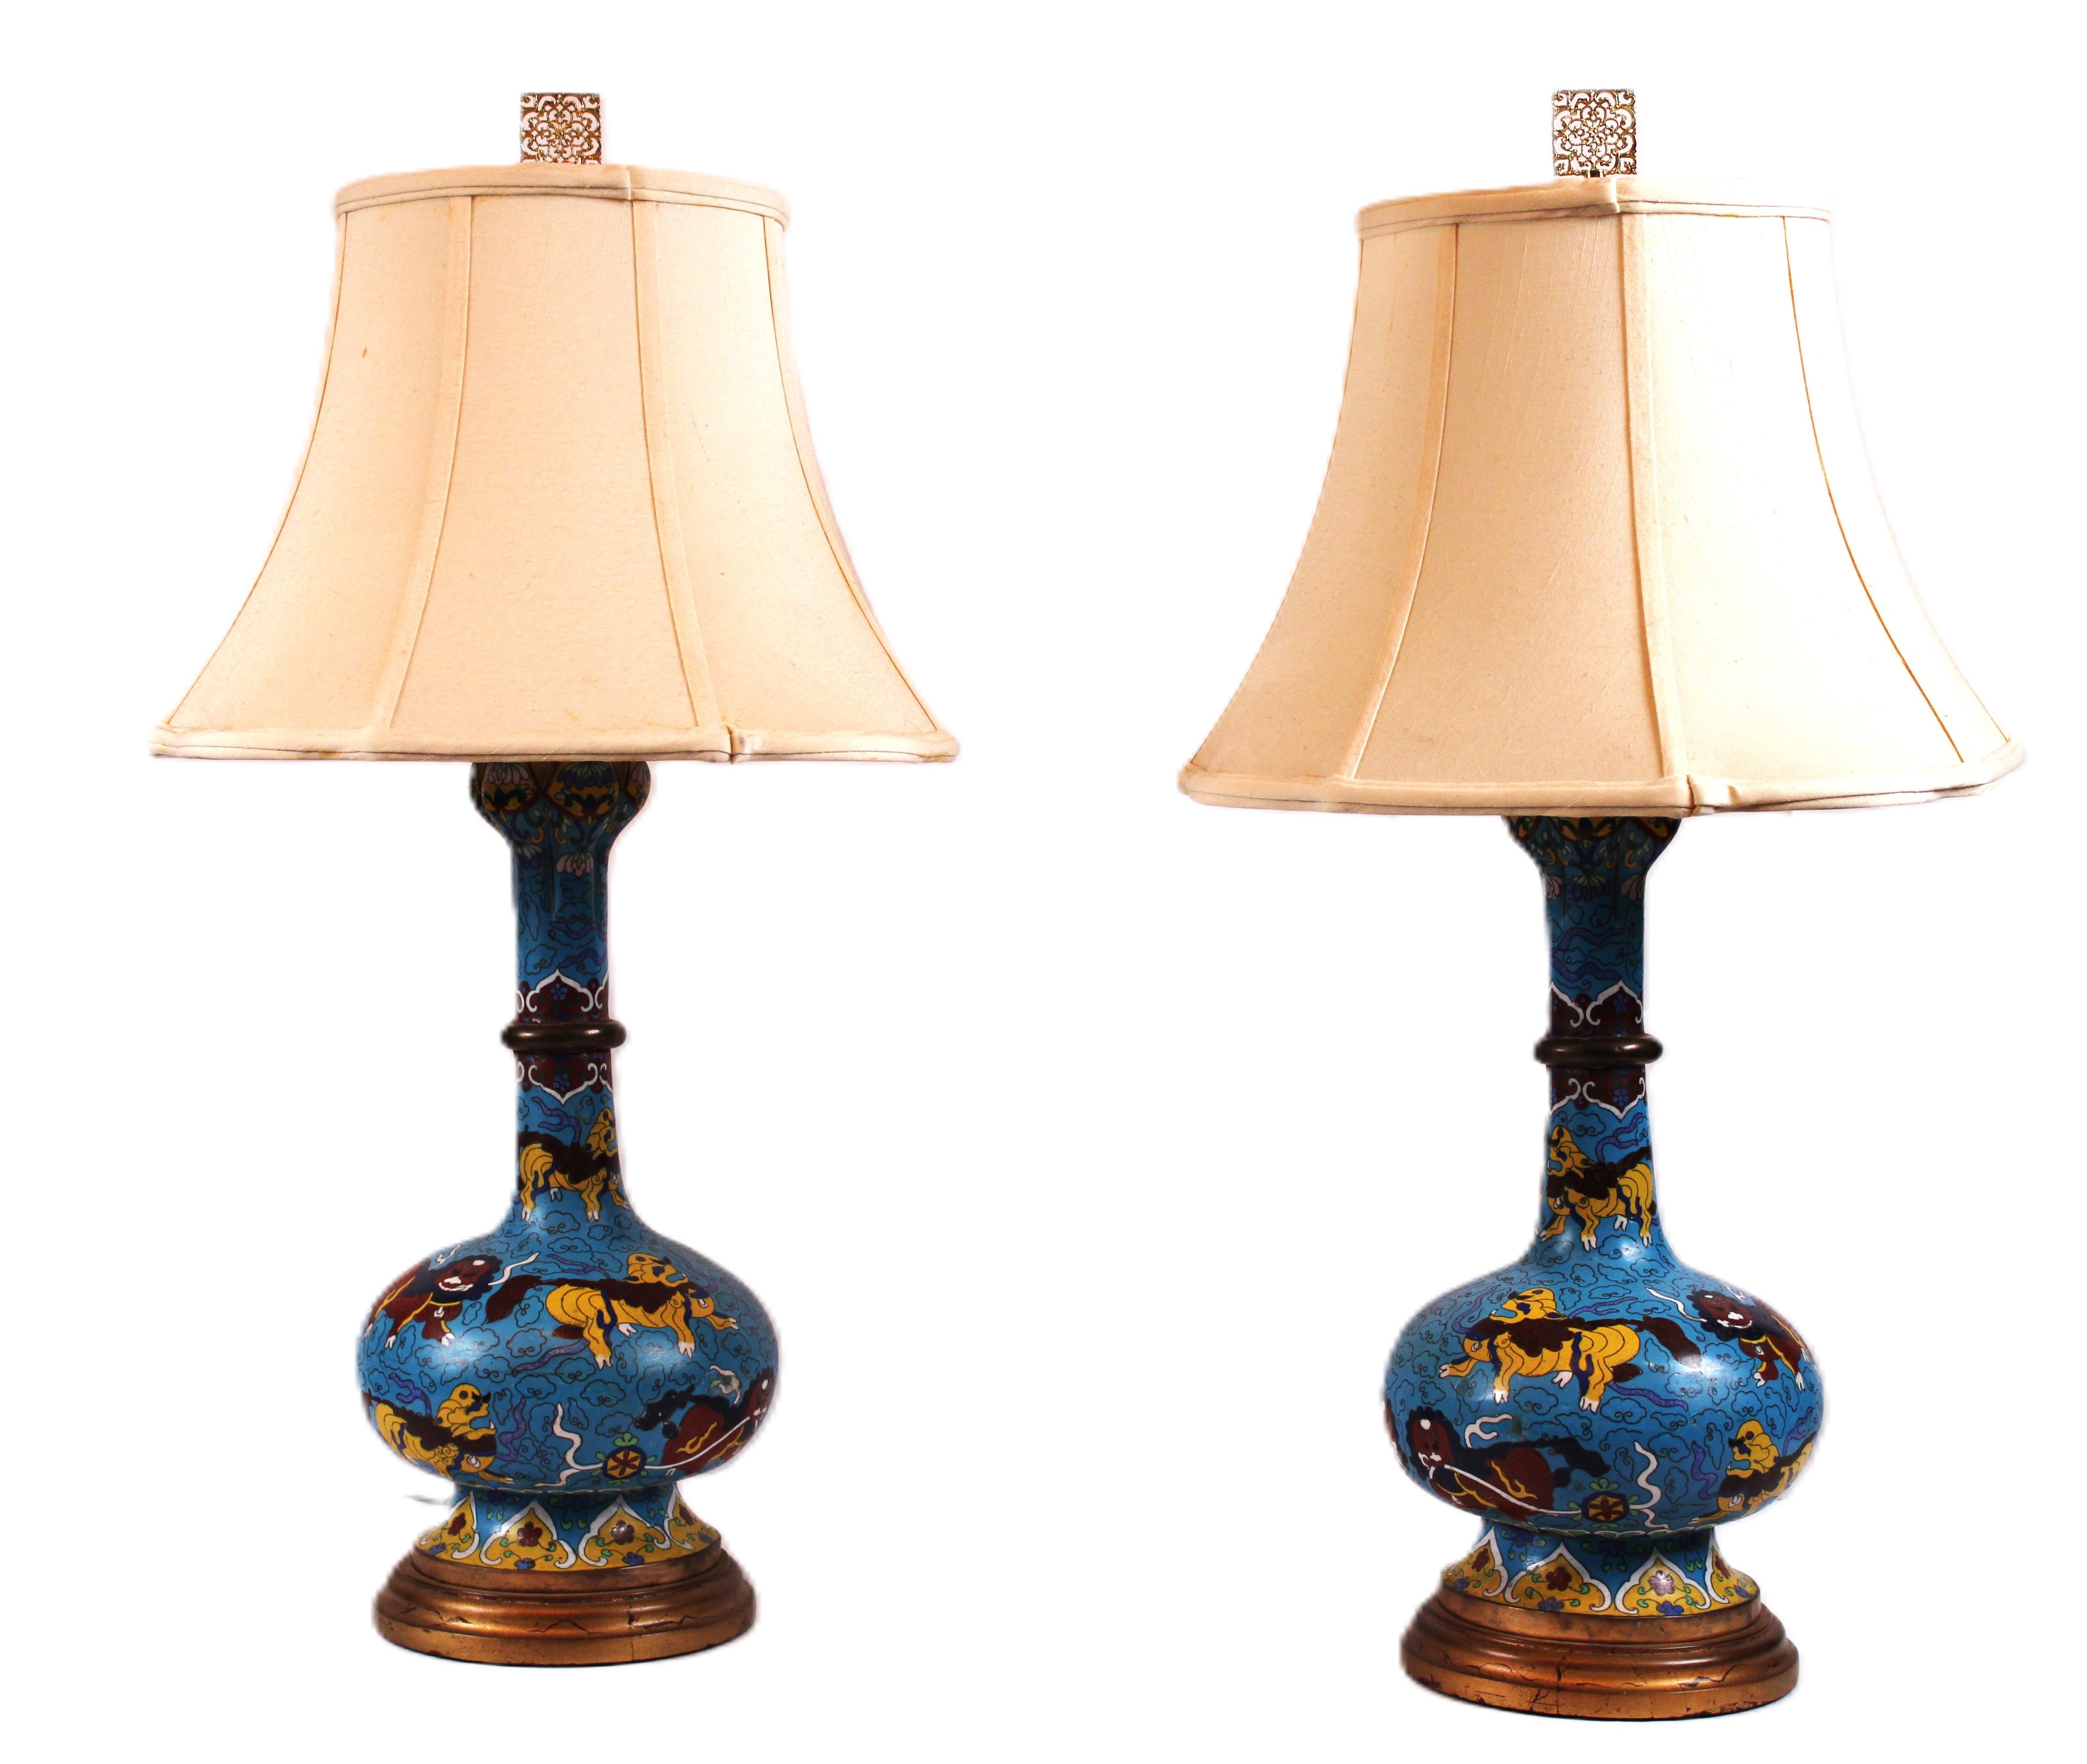 Cloissoné Harmony in Enamel and Silk: Pair of Cloisonne' Lamps with Silk Lampshades For Sale